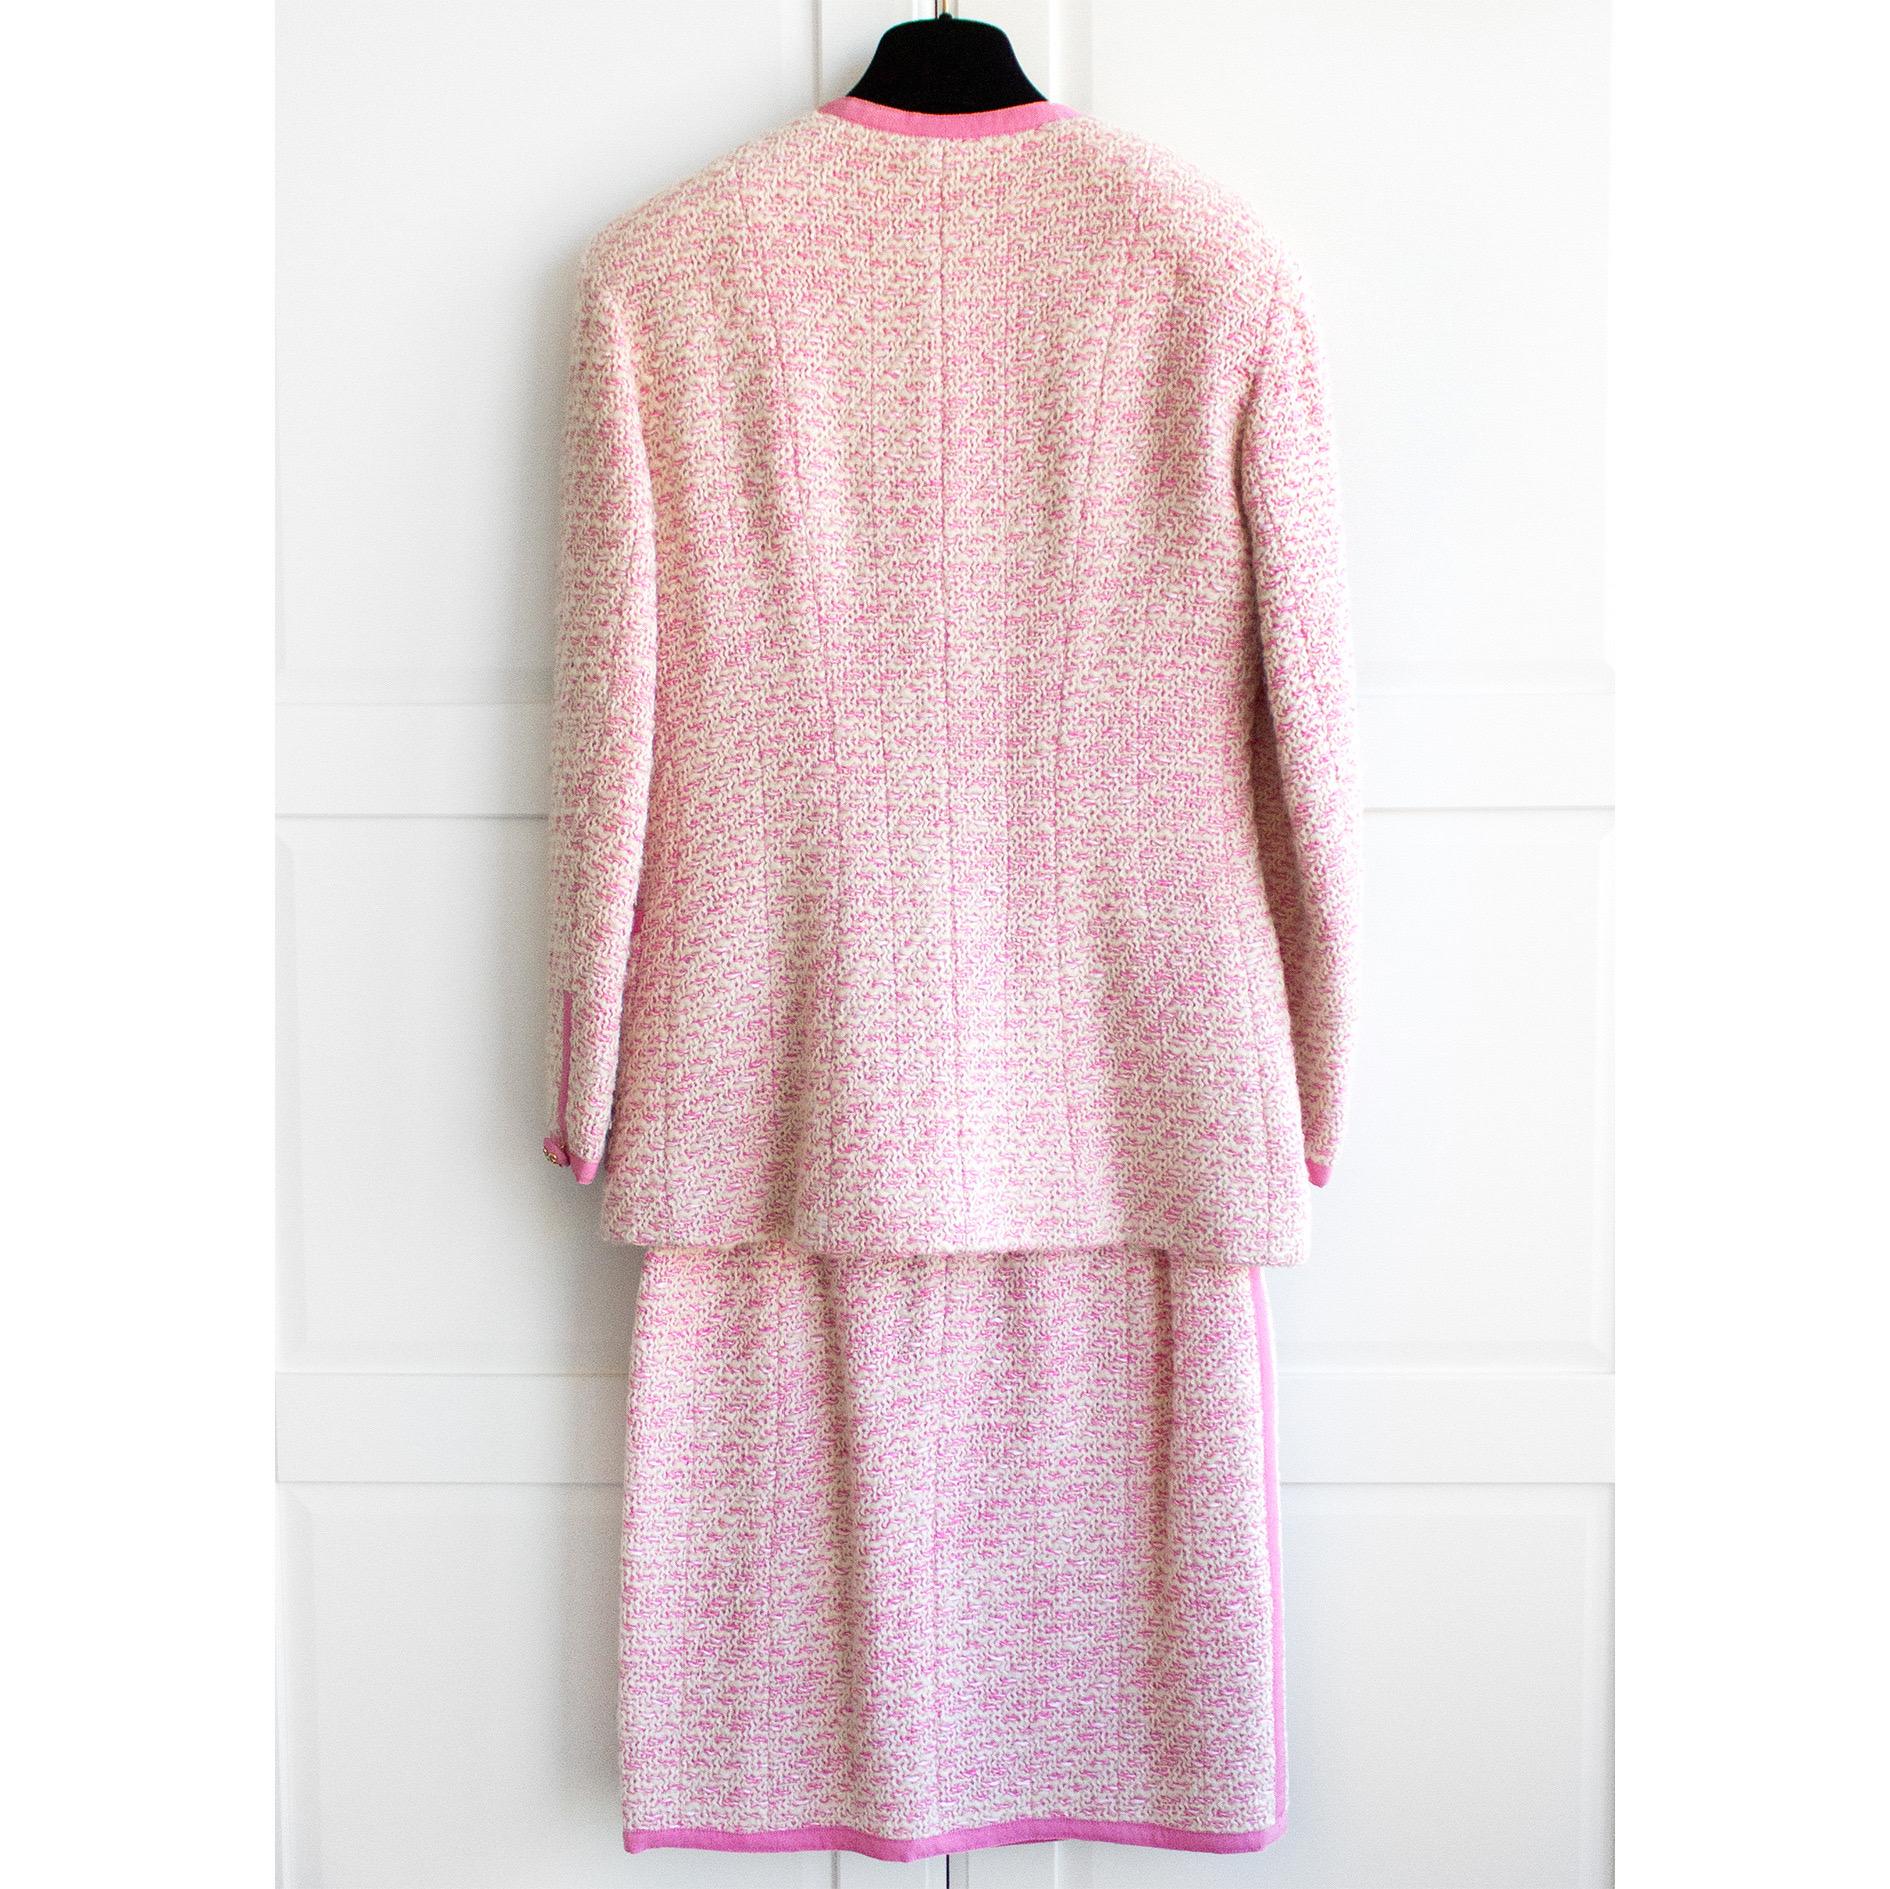 Iconic pink tweed suit from the Chanel Spring 1991 collection. One of the most recognizable Chanel pieces from the '90s. A great find for a true collector. As seen on Linda Evangelista. The same suit belonging to Elizabeth Taylor was sold at